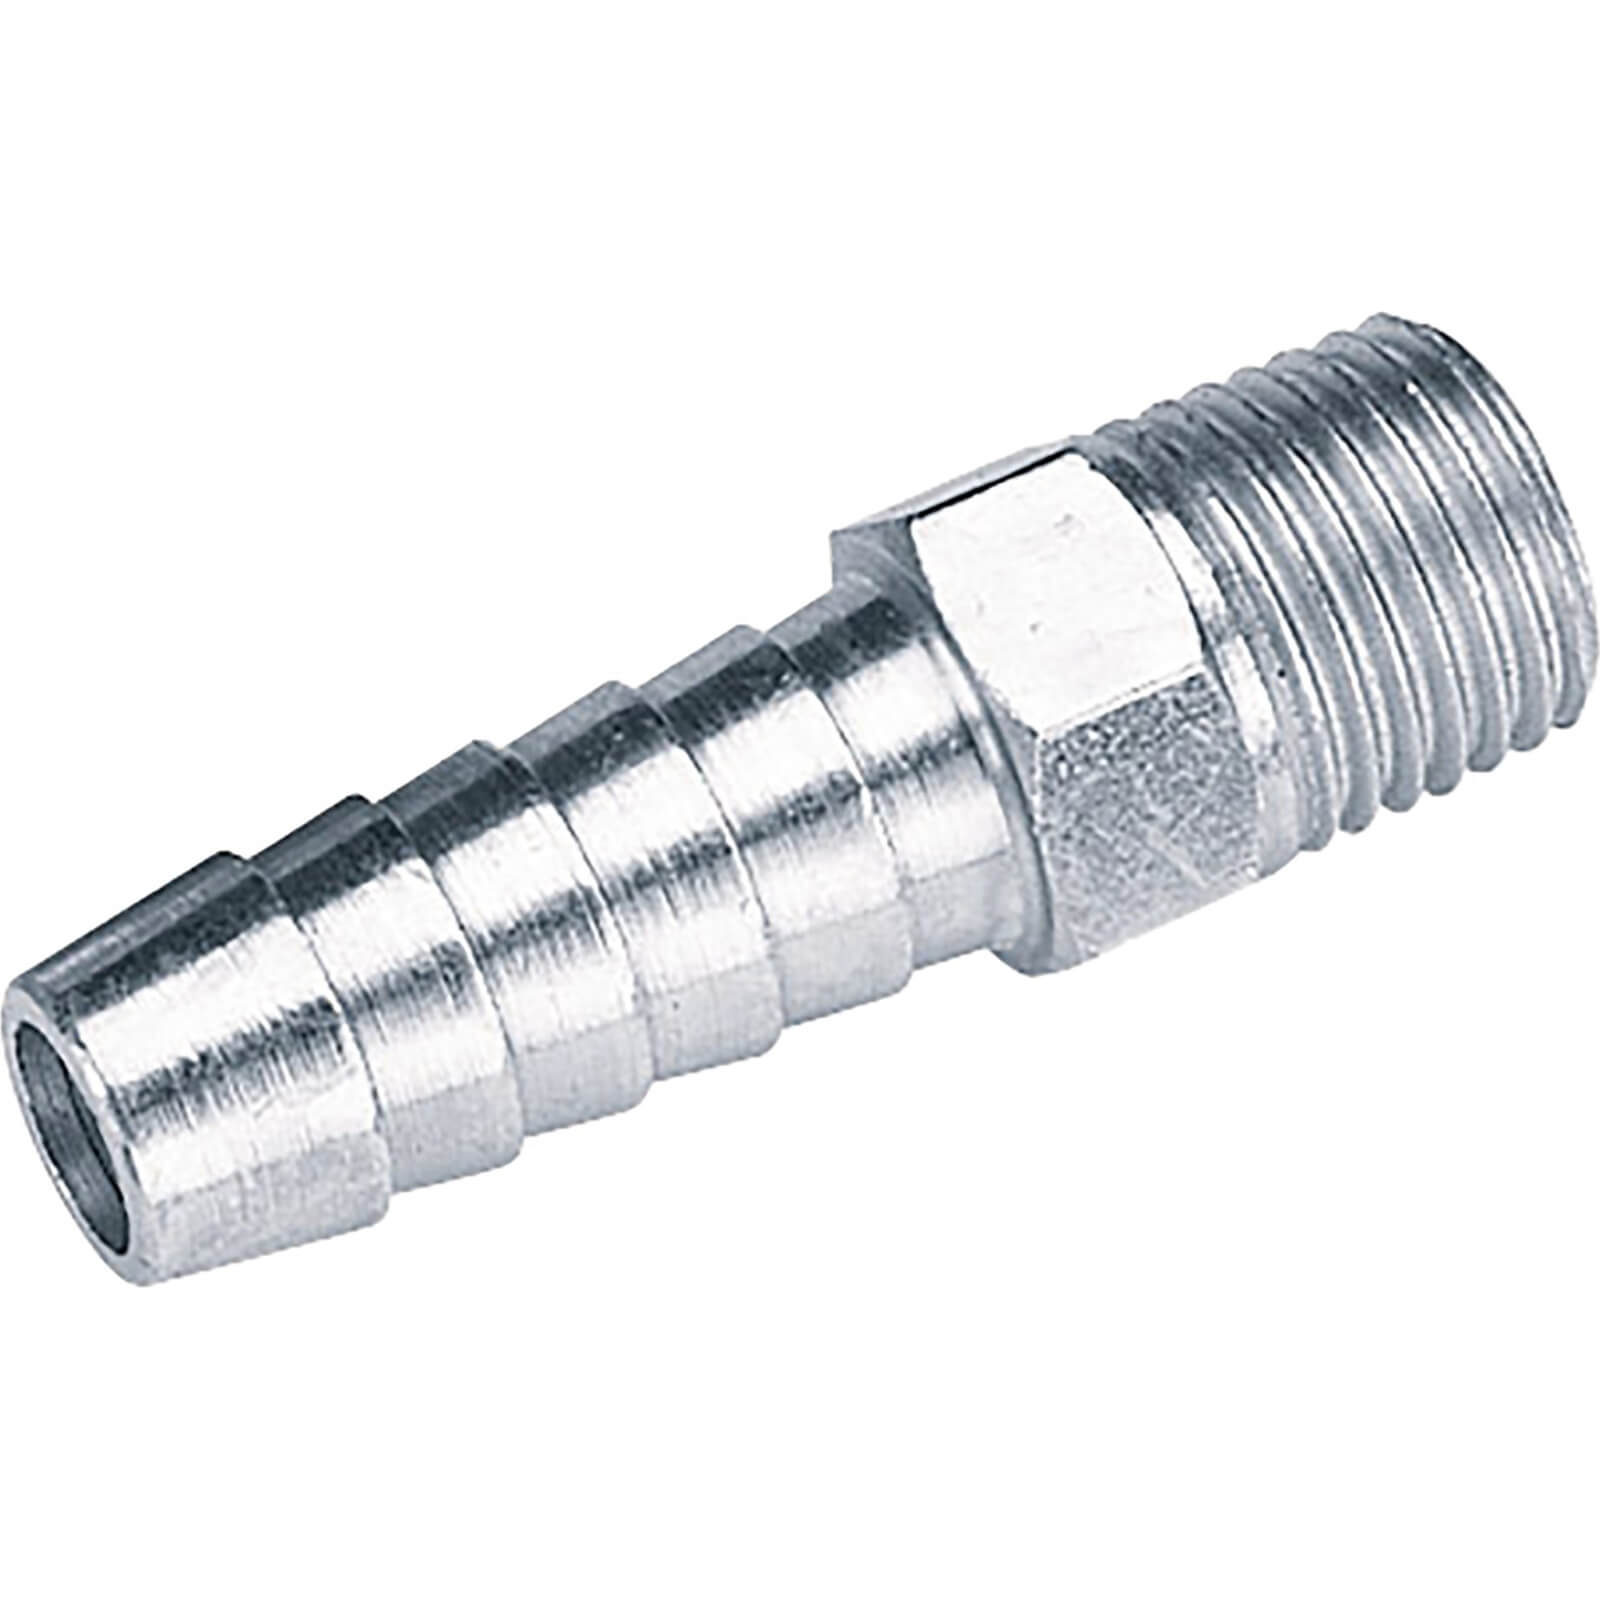 Image of Draper PCL Tailpiece Air Line Fitting BSPT Male Thread 1/4" BSP 3/8" Pack of 5